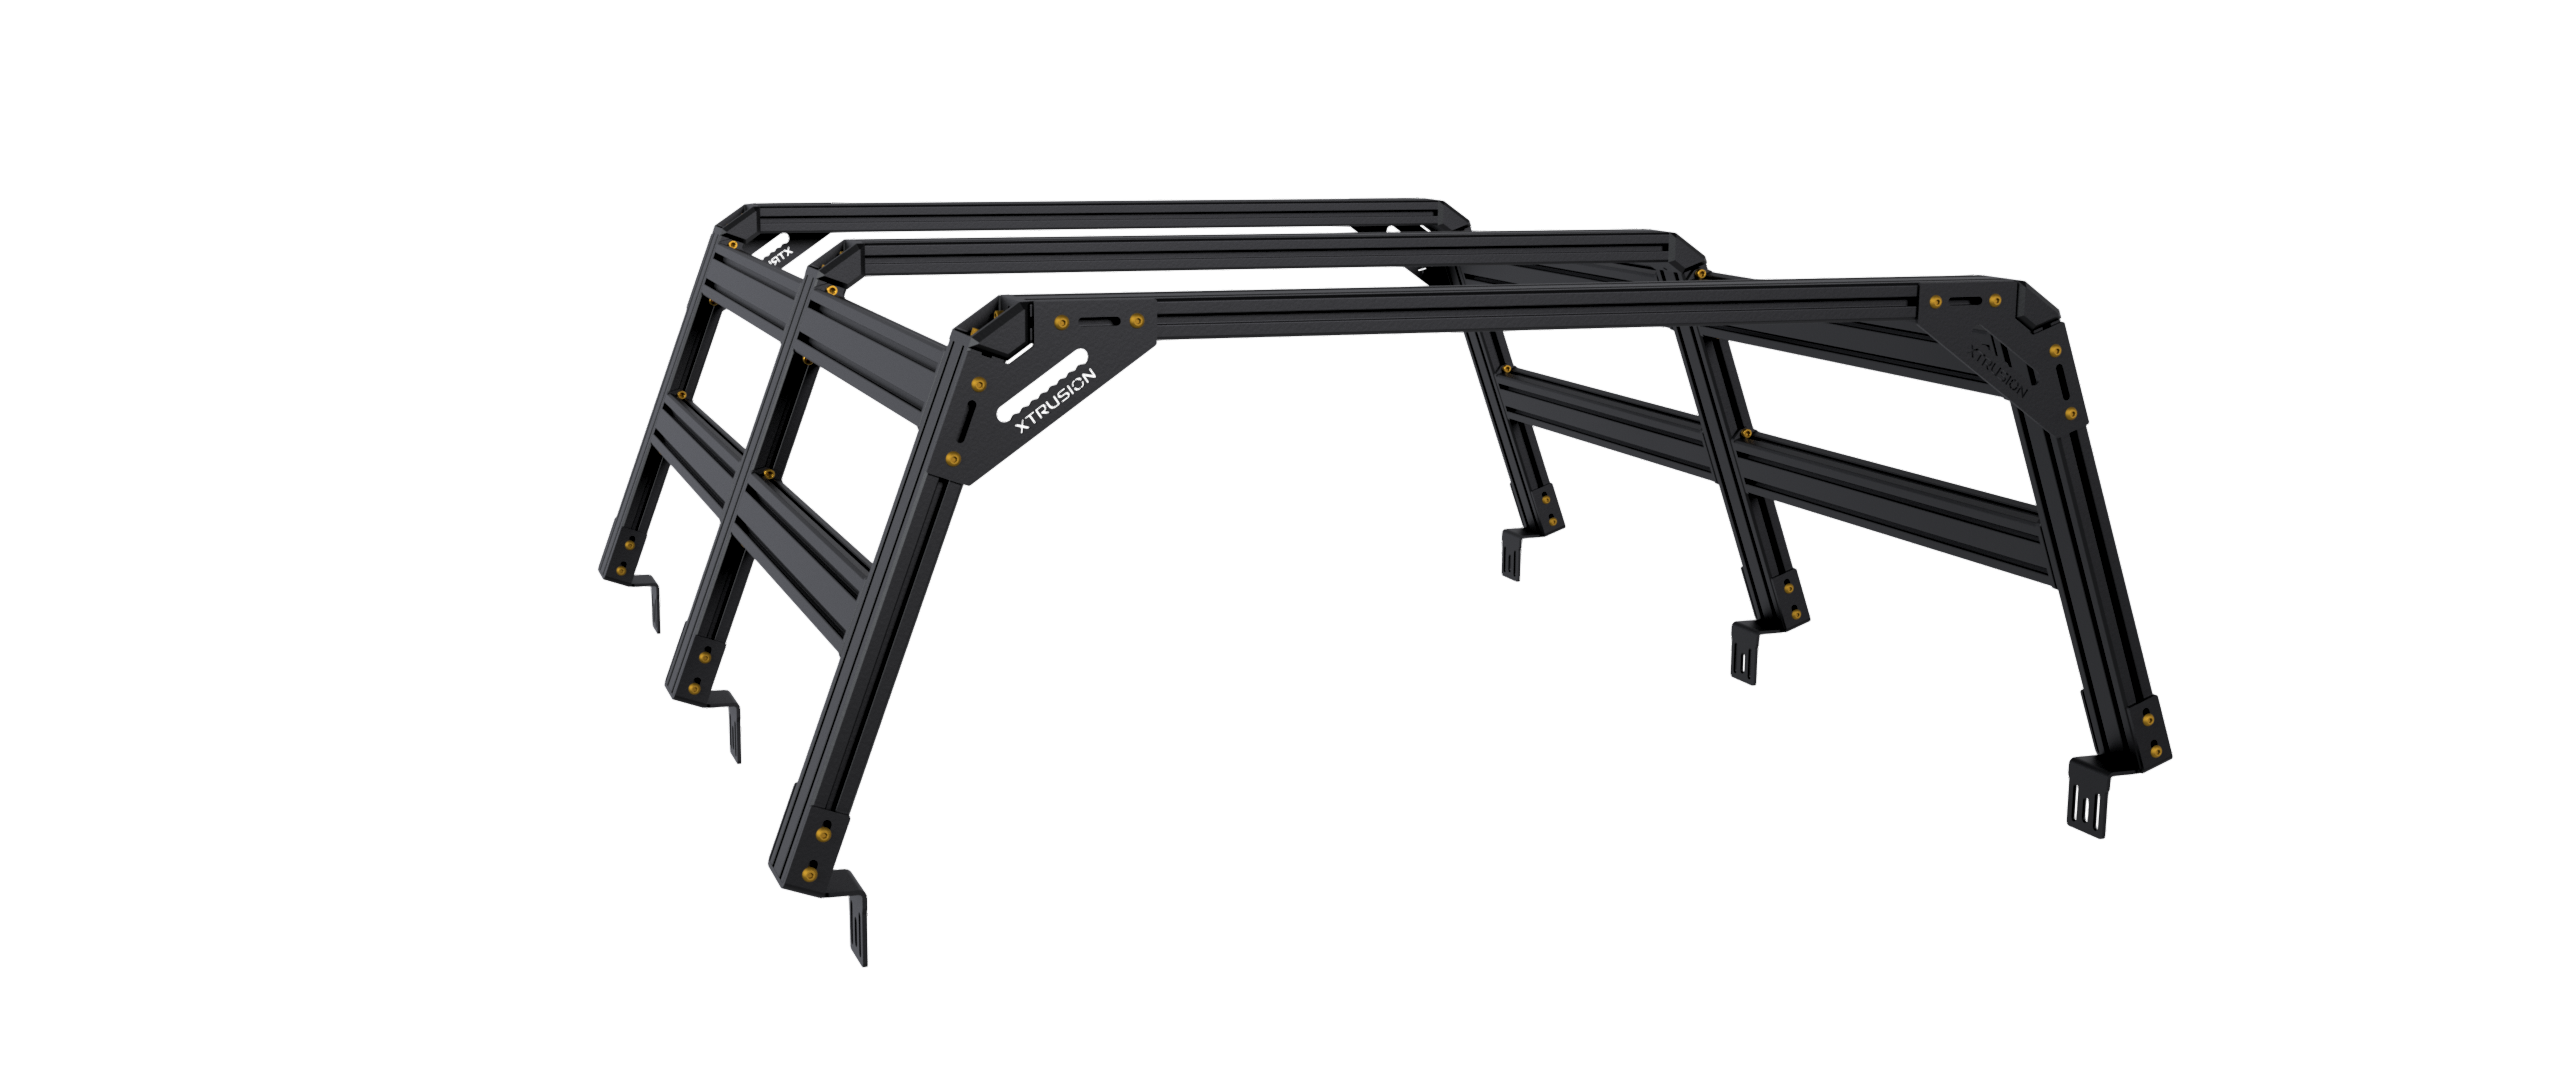 XTR3 Bed Rack for Ford F-150